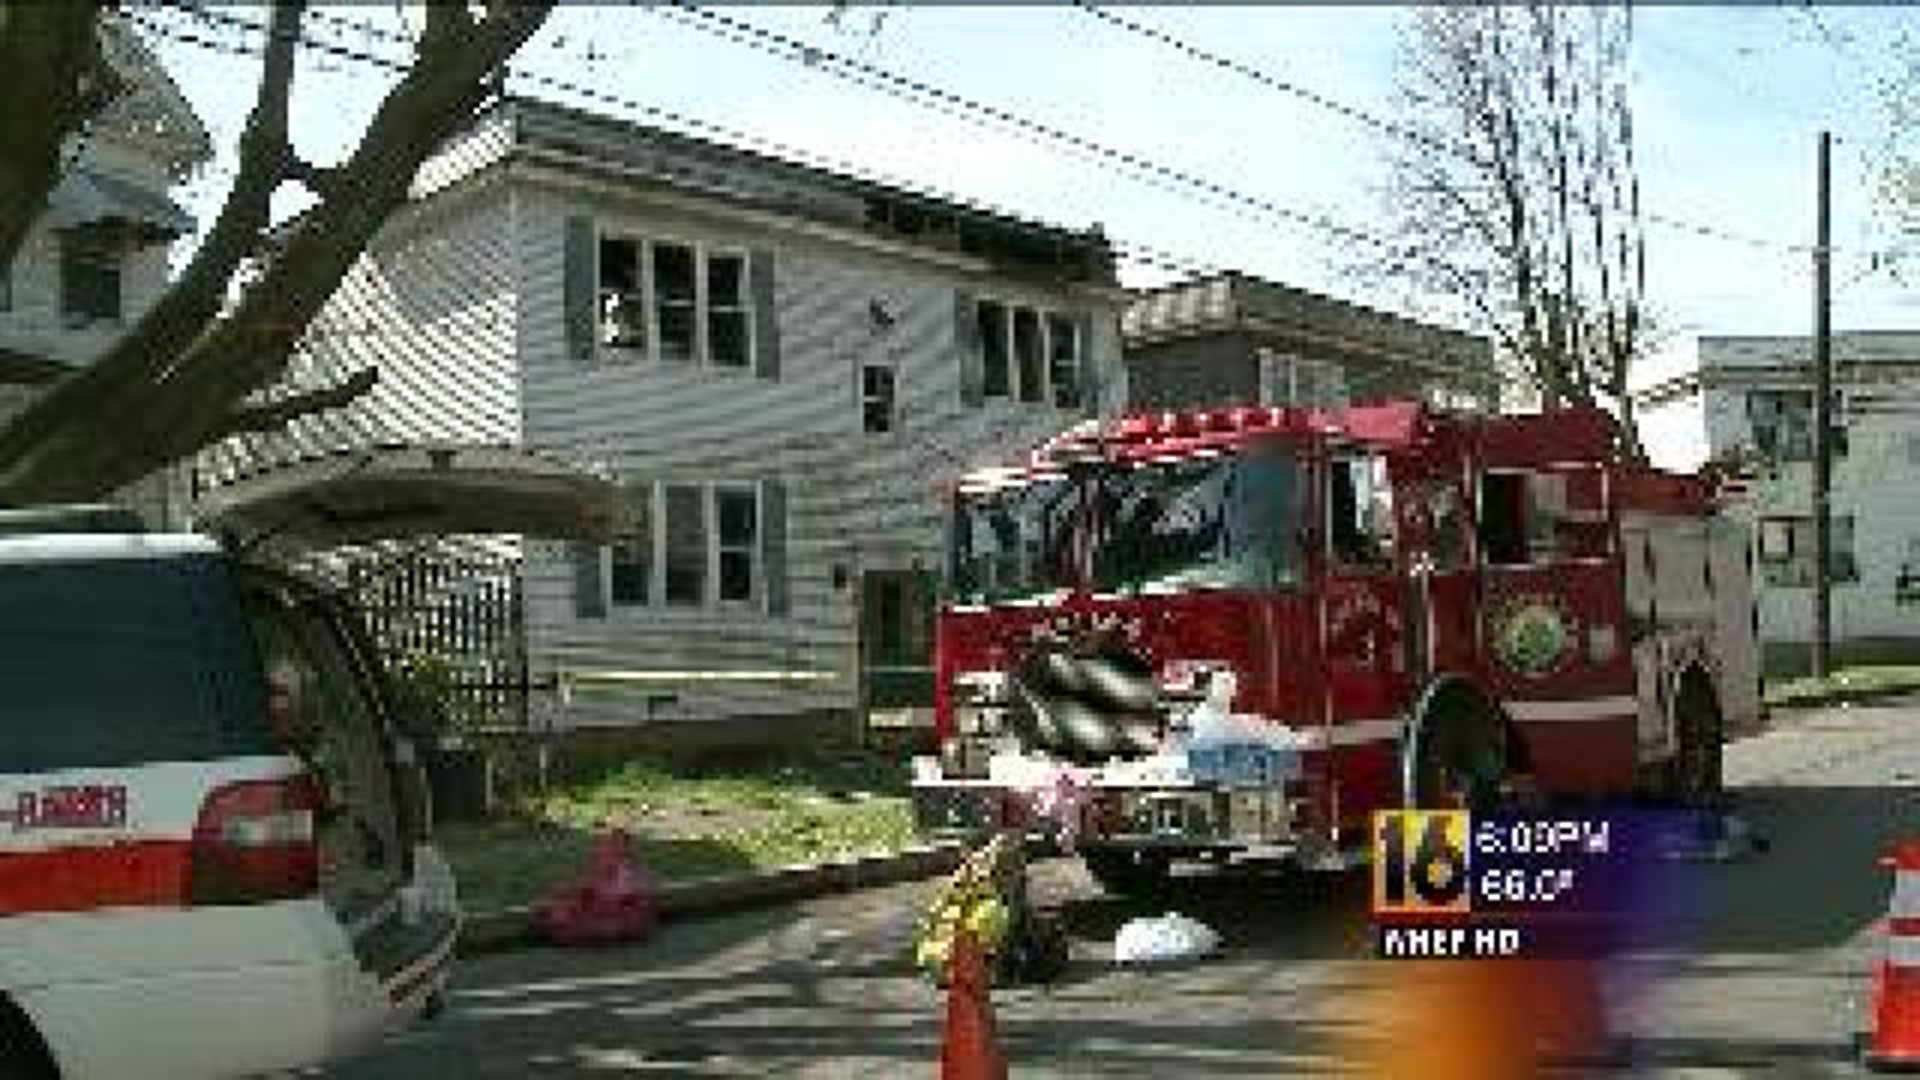 Fire At A Vacant Apartment Building In Wilkes-Barre